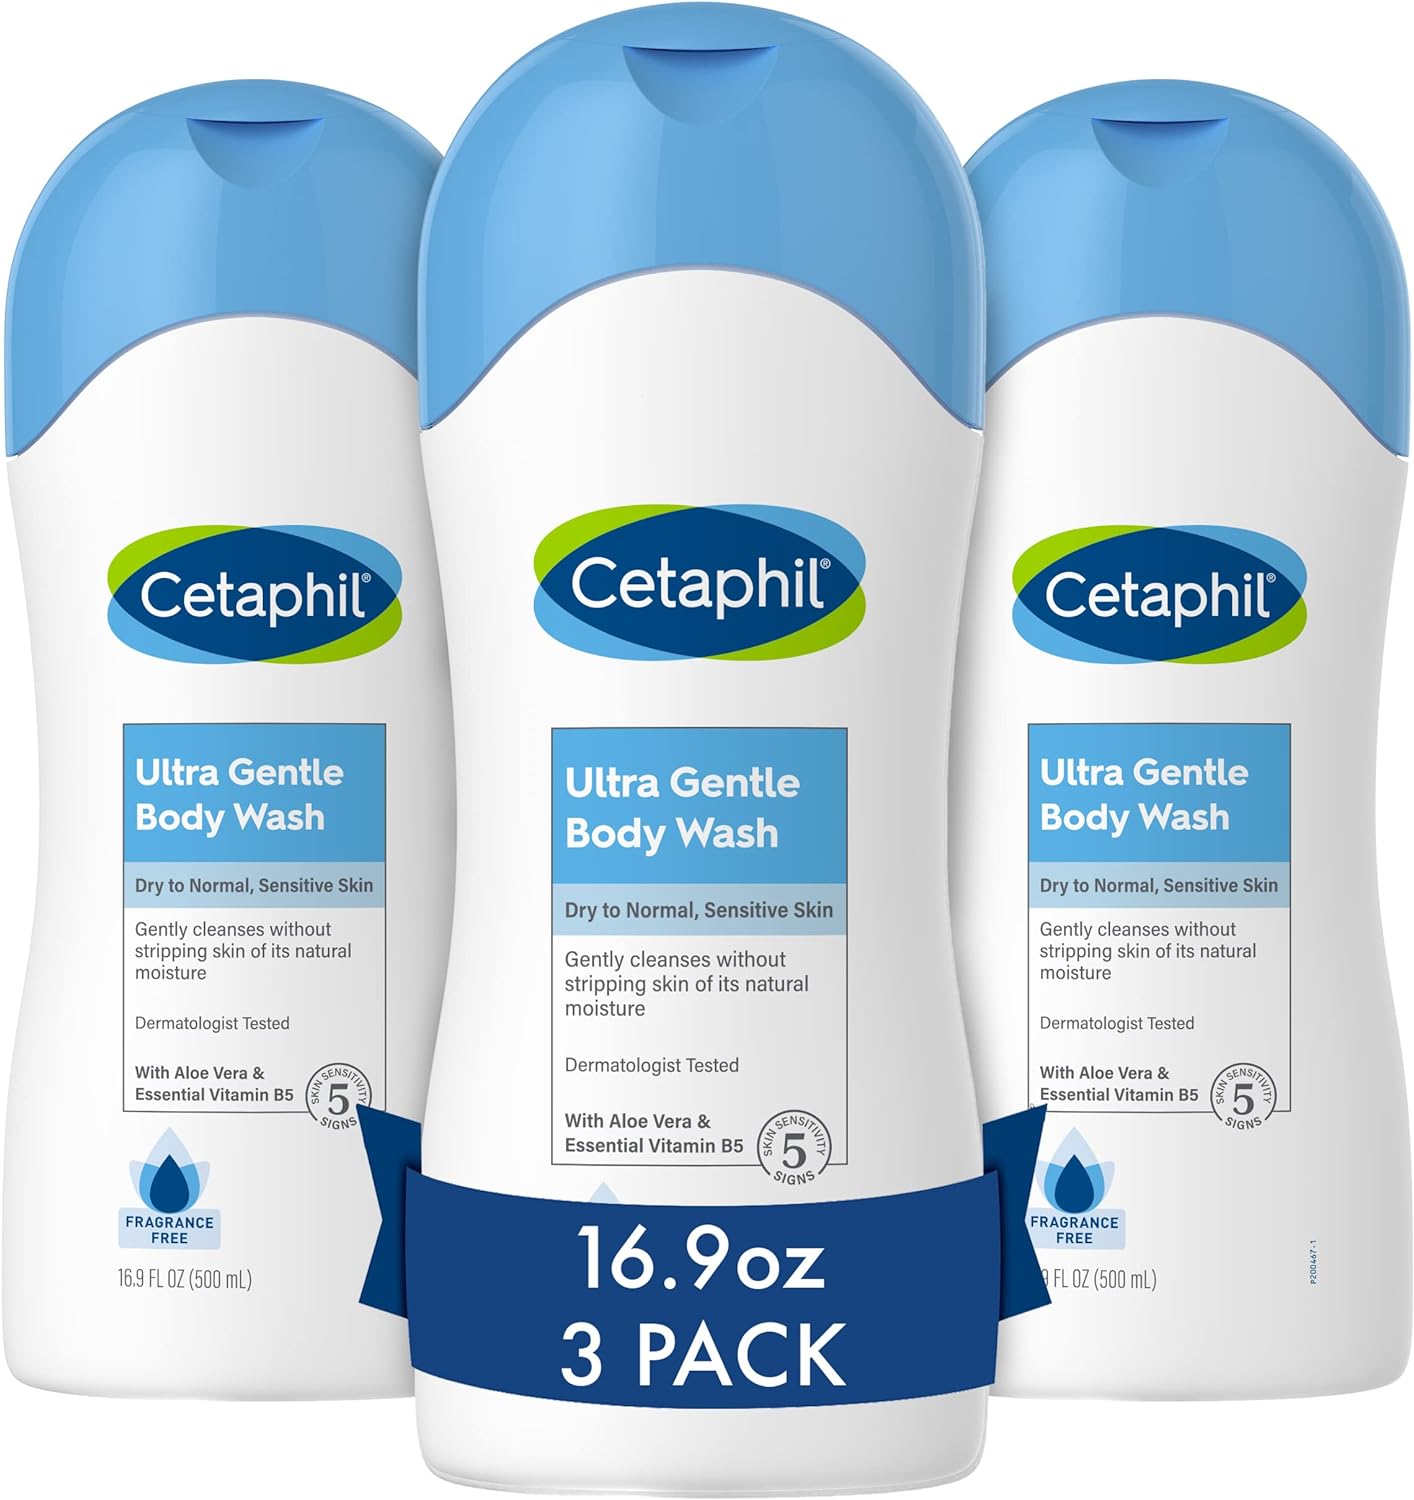 Cetaphil Ultra Gentle Refreshing Body Wash, For Dry to Normal, Sensitive Skin, 16.9oz Pack of 3, Aloe Vera, Calendula, Vitamin B5, Hypoallergenic, Paraben Free, Fragrance Free, Dermatologist Tested